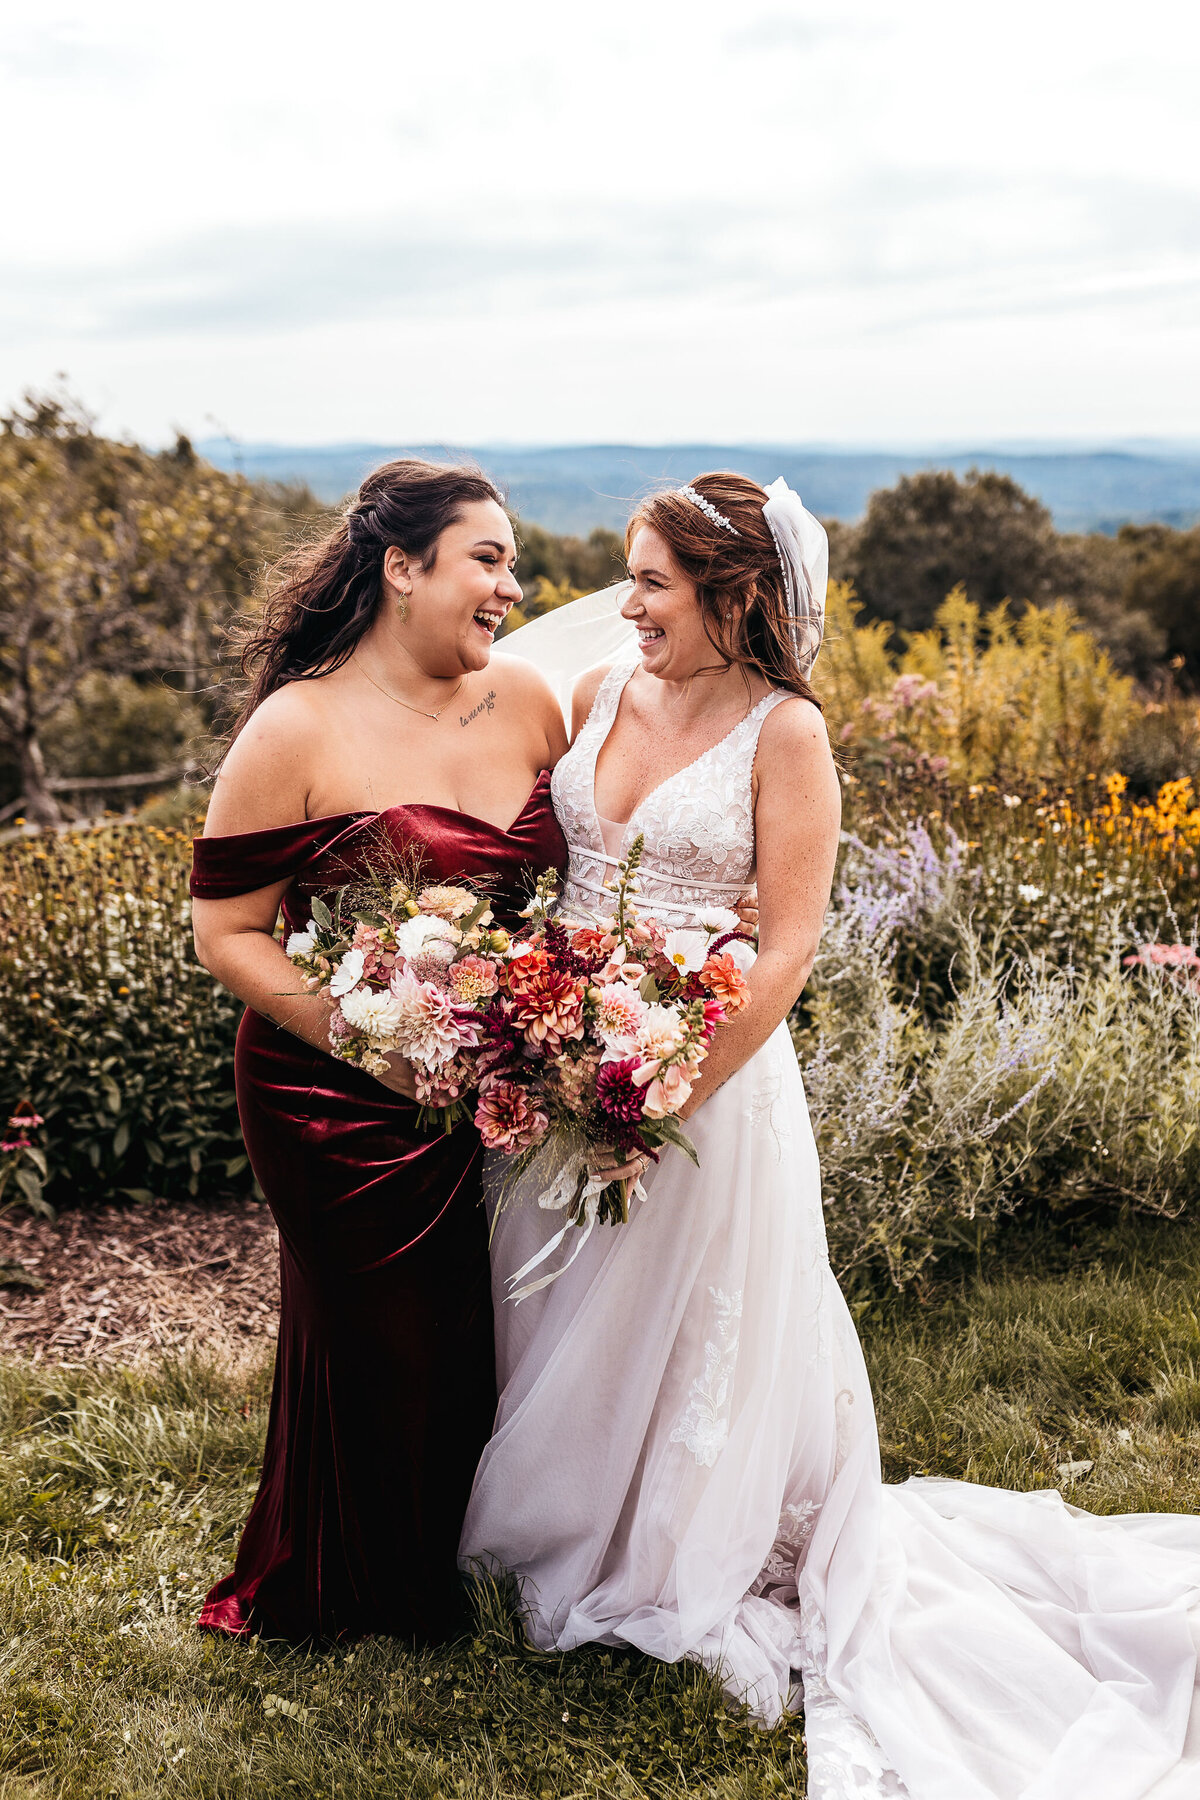 Joyful moment between bride and her maid of honor in garden at Cobb Hill Estate in NH by Lisa Smith Photography